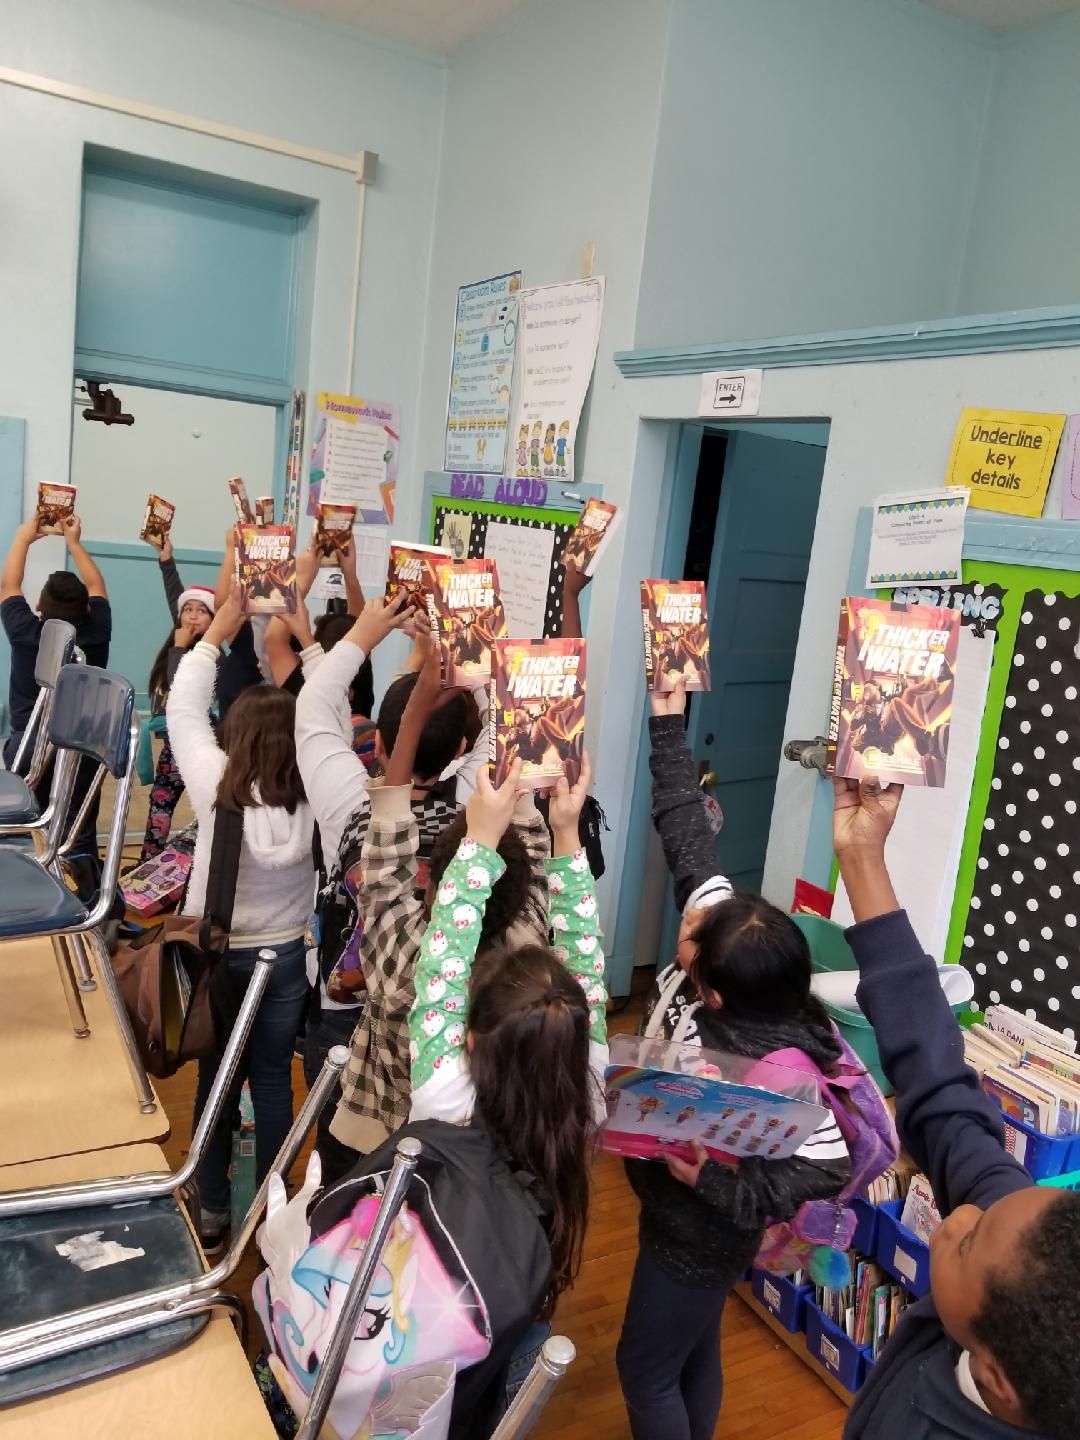 Kids with books in the air.